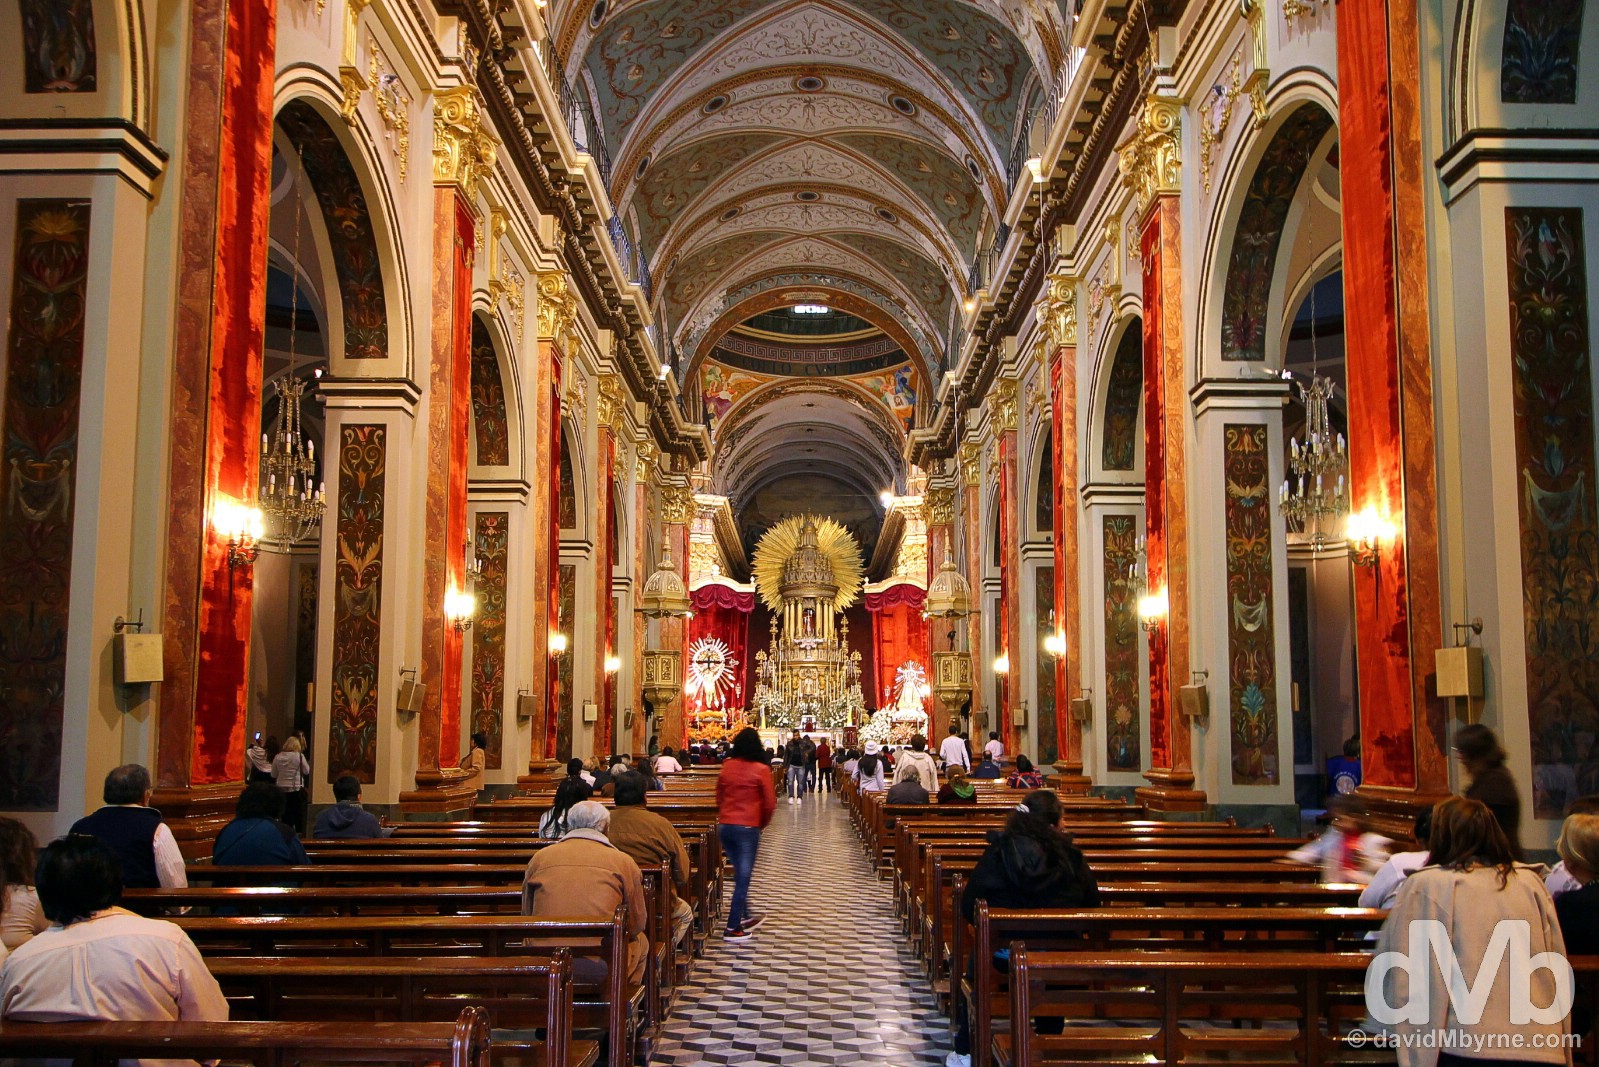 The interior of the Catedral in Salta, northern Argentina. September 5, 2015.